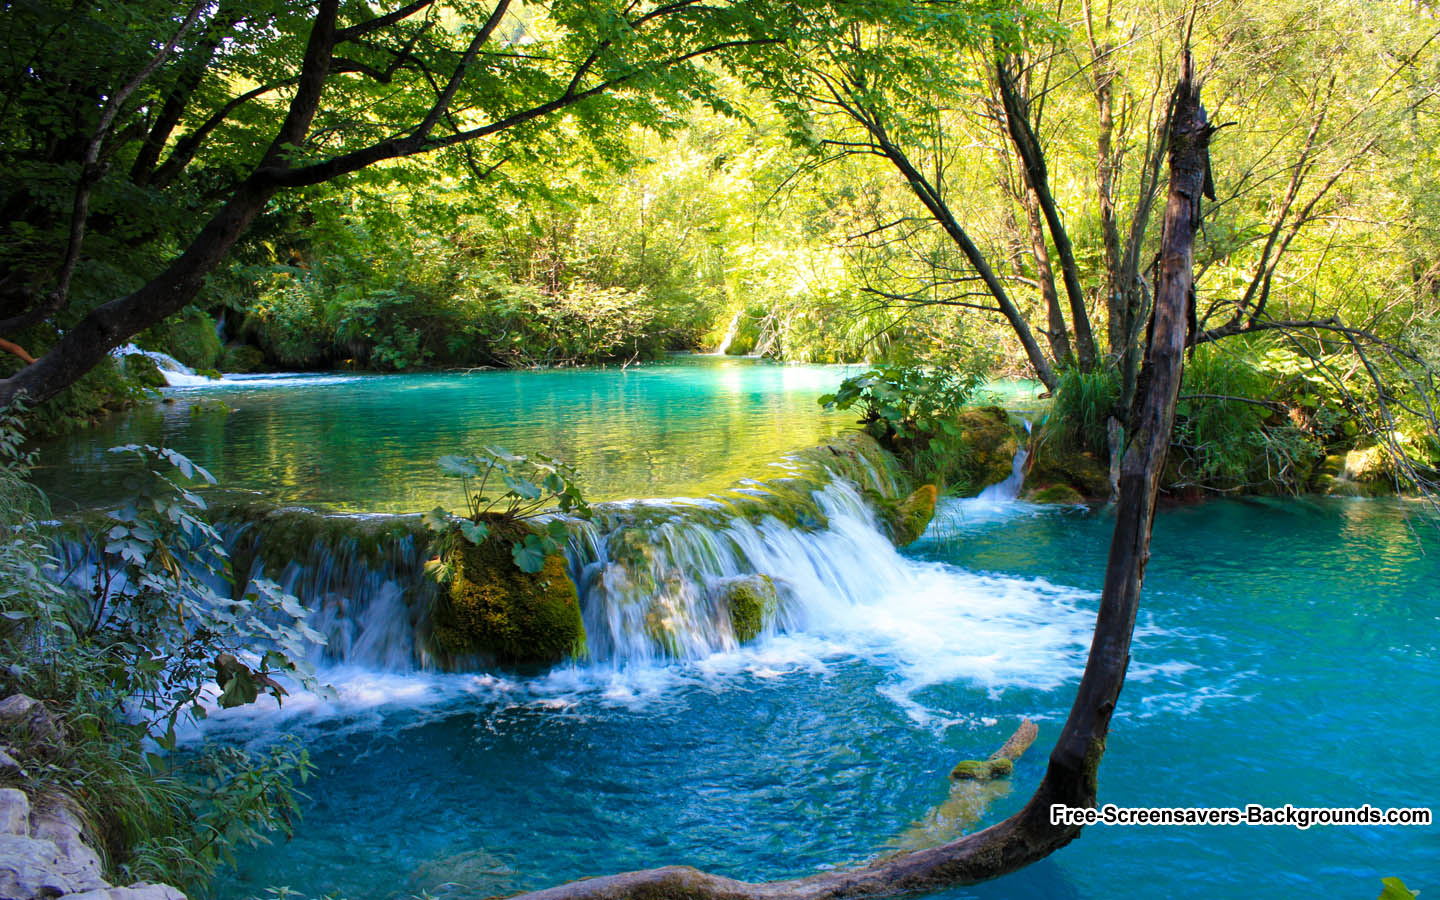  in Plitvice National Park Croatia   Screensavers and Backgrounds 1440x900